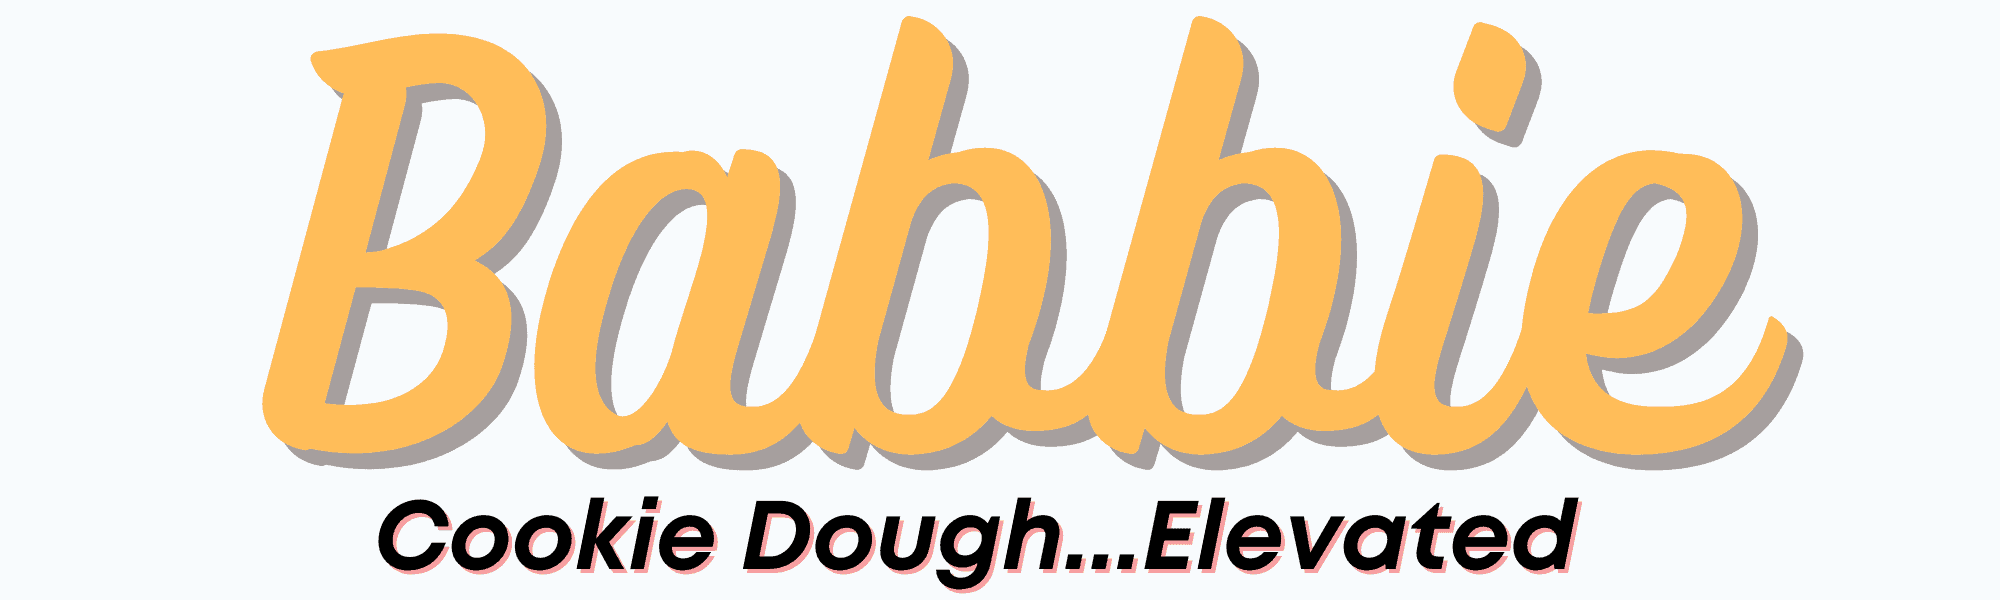 Babbie Cookie Dough Elevated